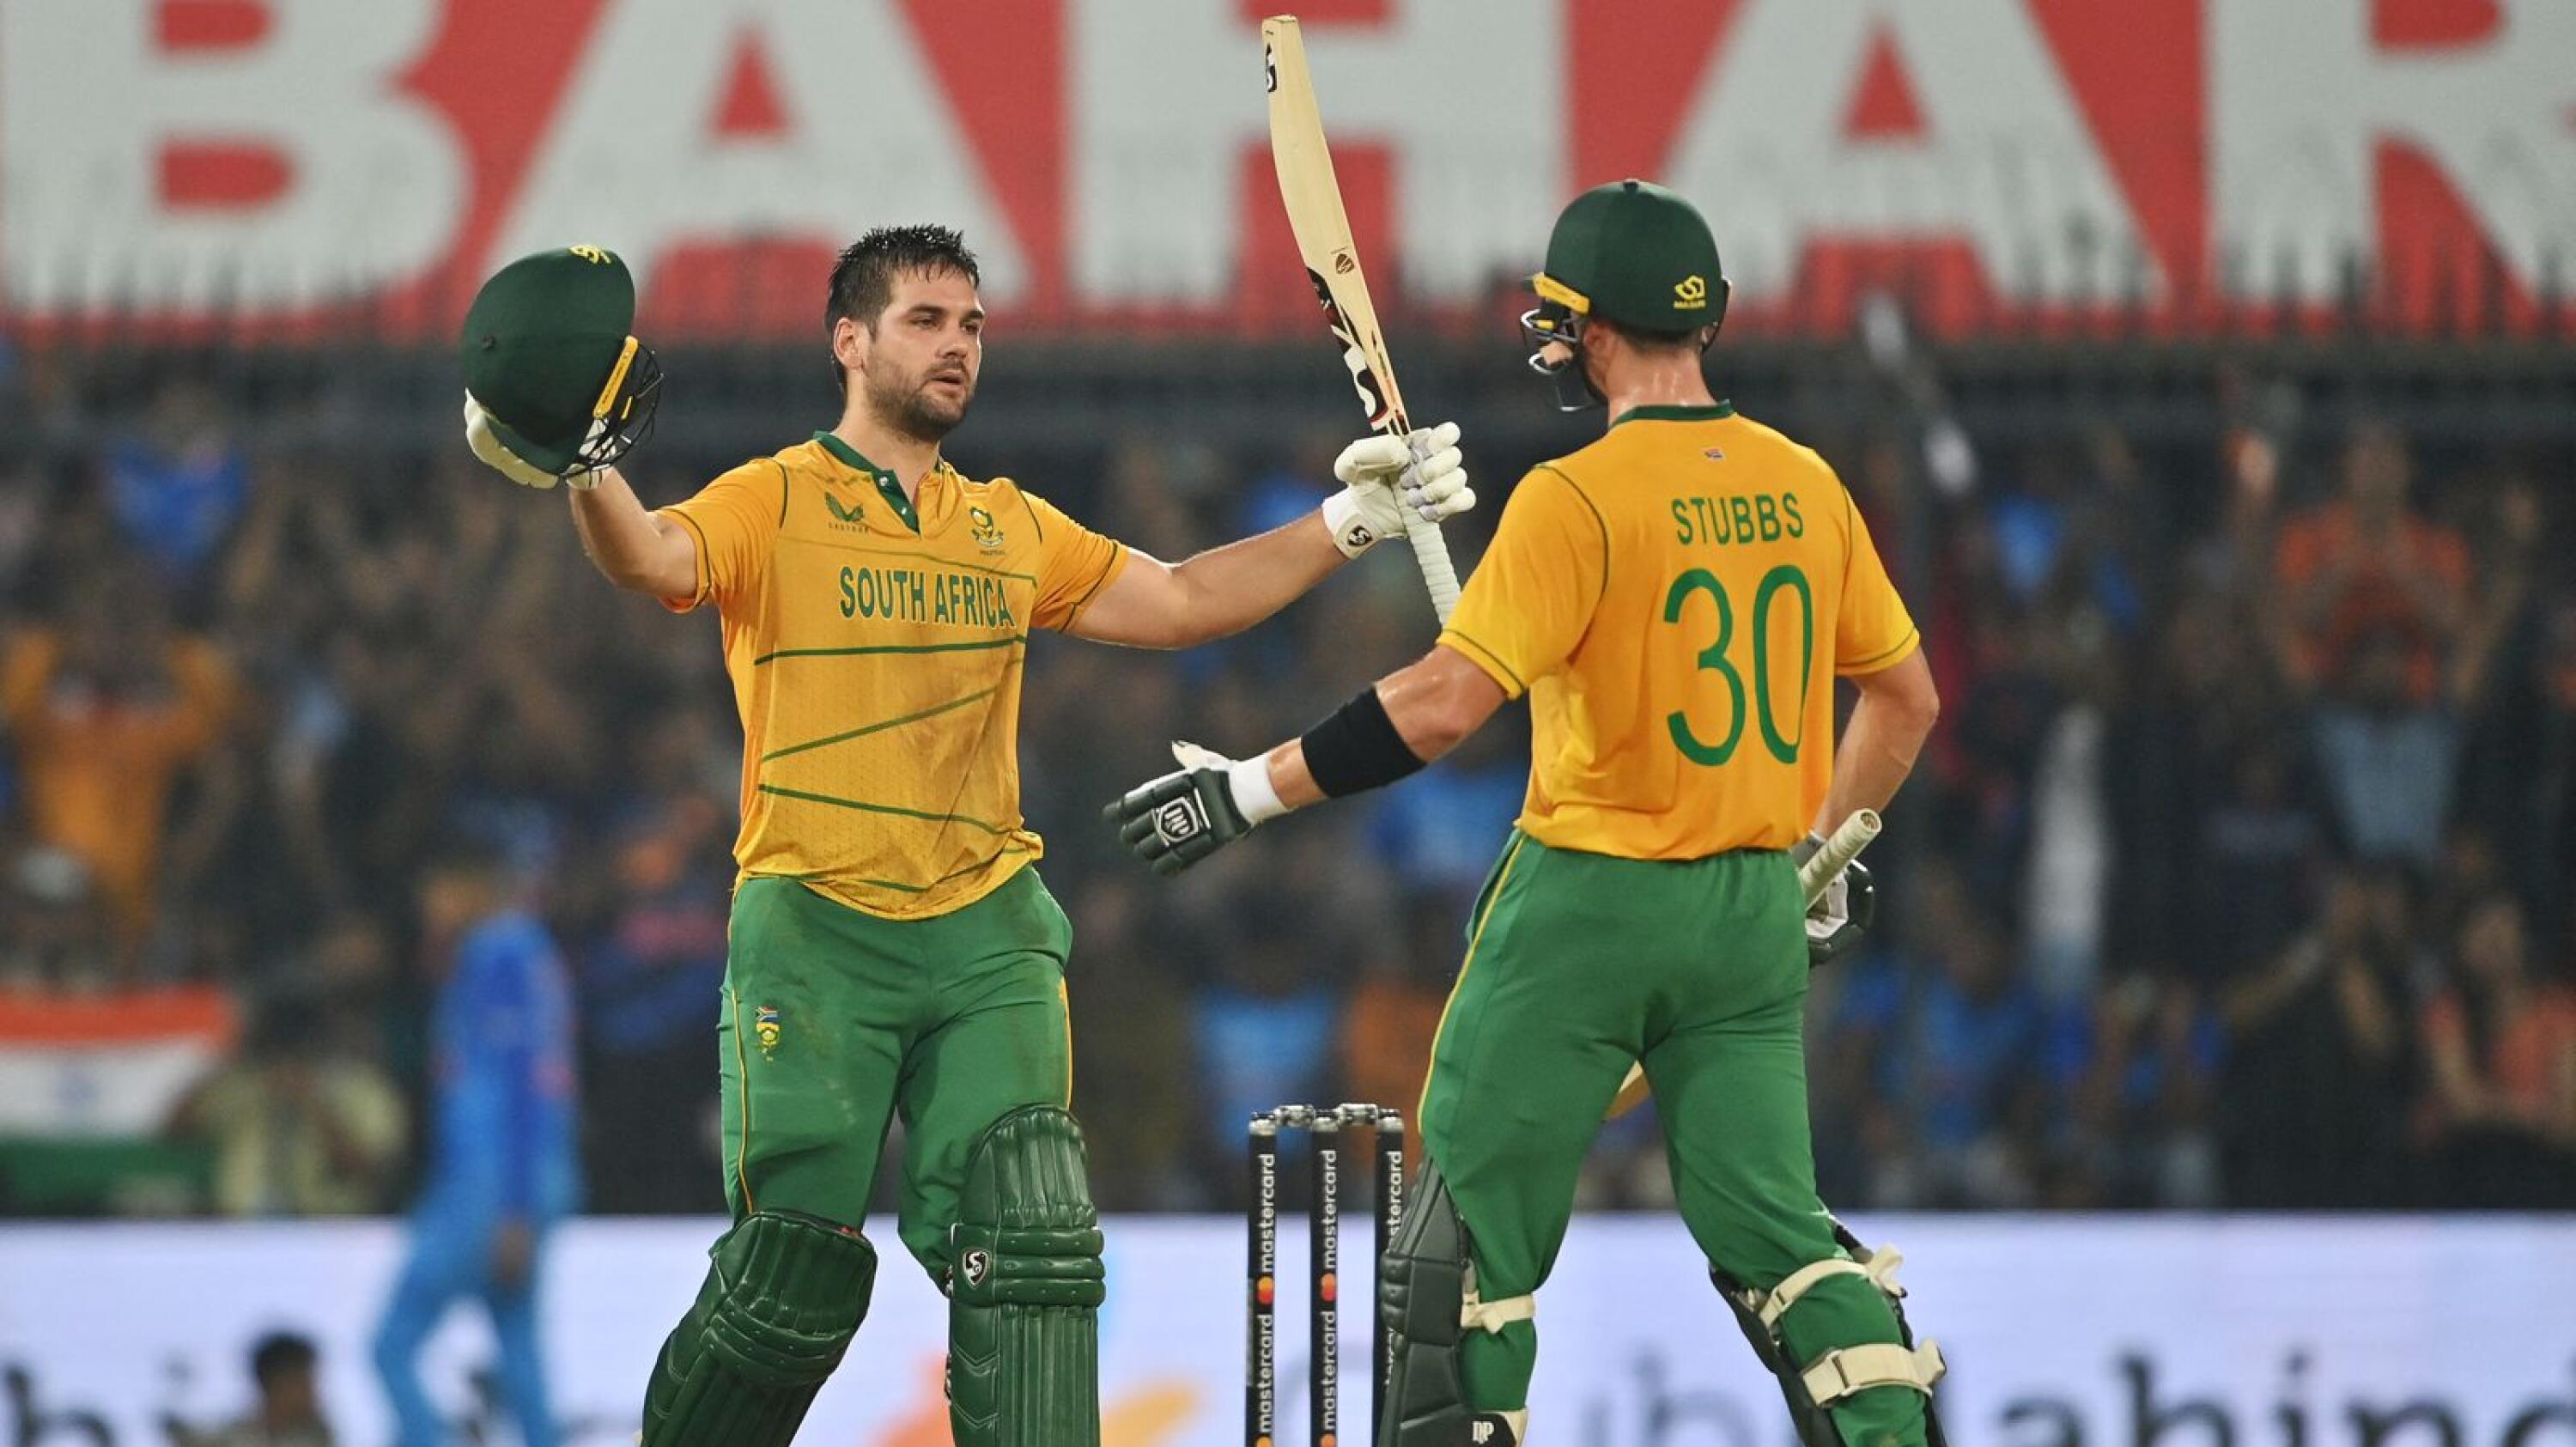 Rilee Rossouw celebrates with Tristan Stubbs after scoring a century during the third and final T20 international against India at the Holkar Cricket Stadium on Tuesday.